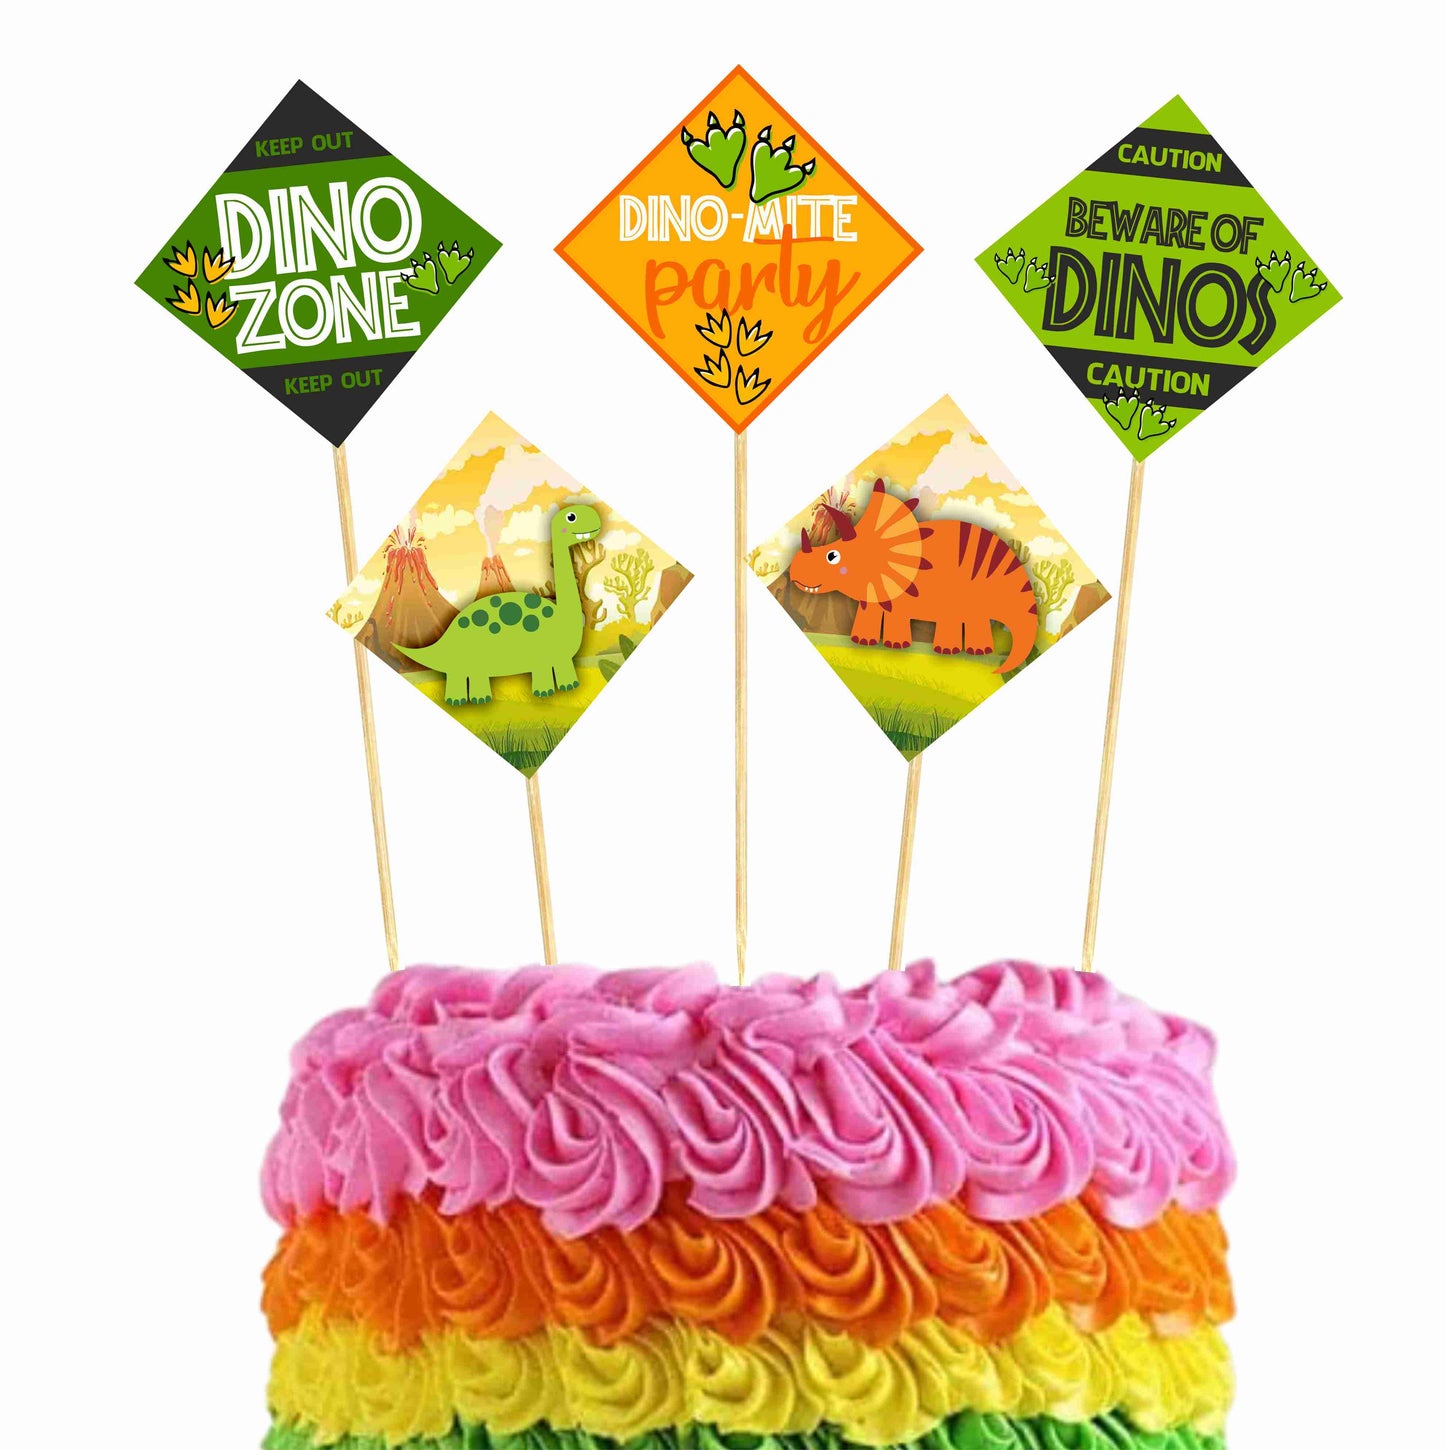 Dinosaur Theme Cake Topper Pack of 10 Nos for Birthday Cake Decoration Theme Party Item For Boys Girls Adults Birthday Theme Decor